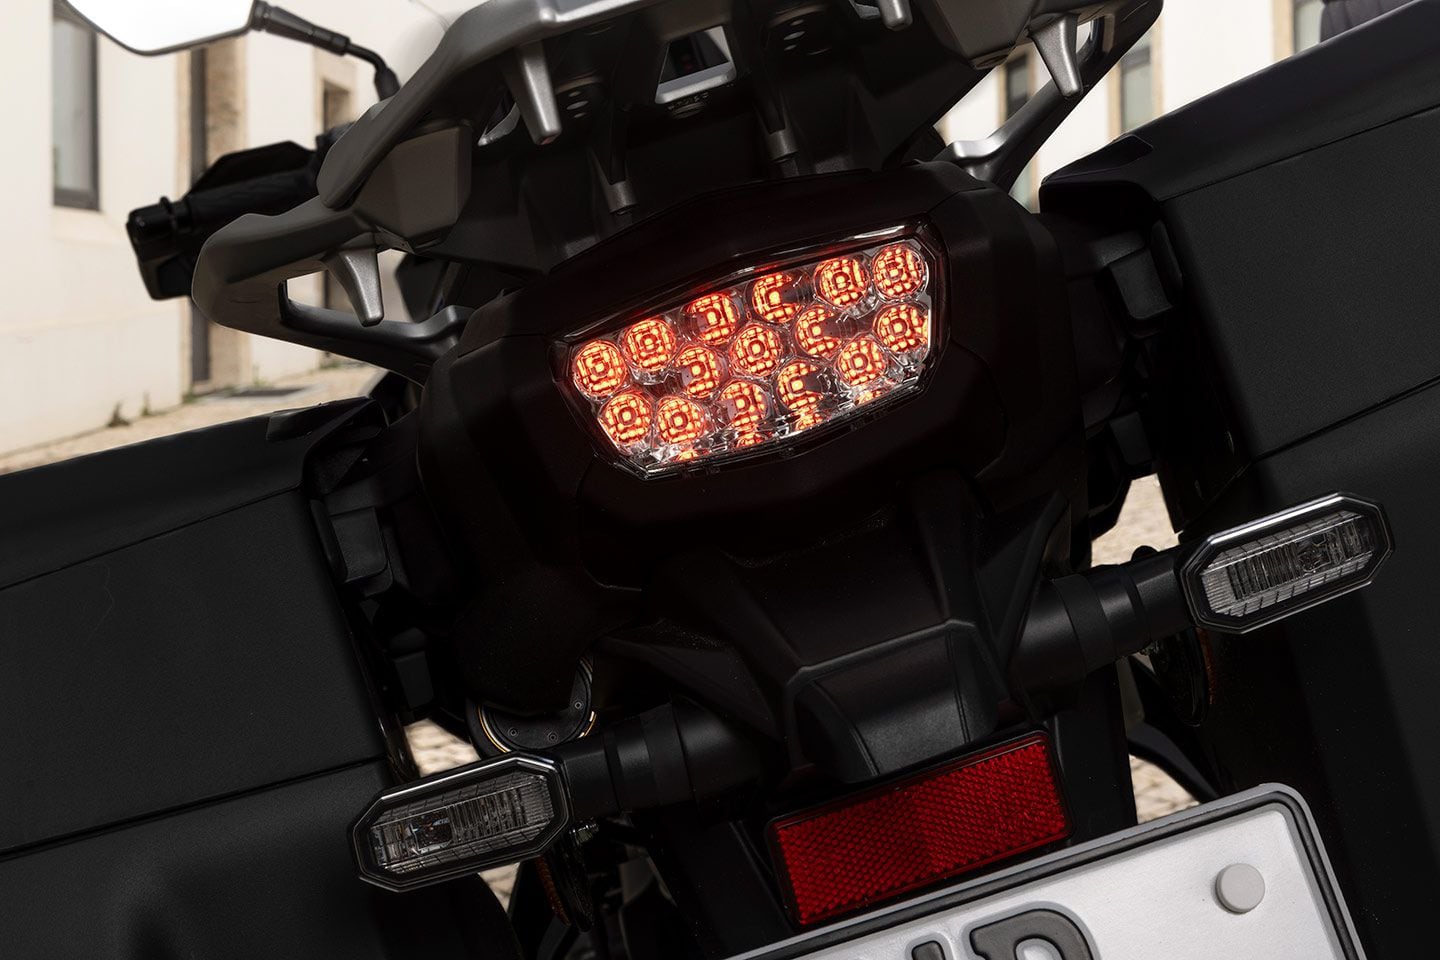 While the LED headlights and turn signals are quite sleek, the taillight and plastic casing are less stunning. It’s nothing major, but does stand out on an $18,500 bike.